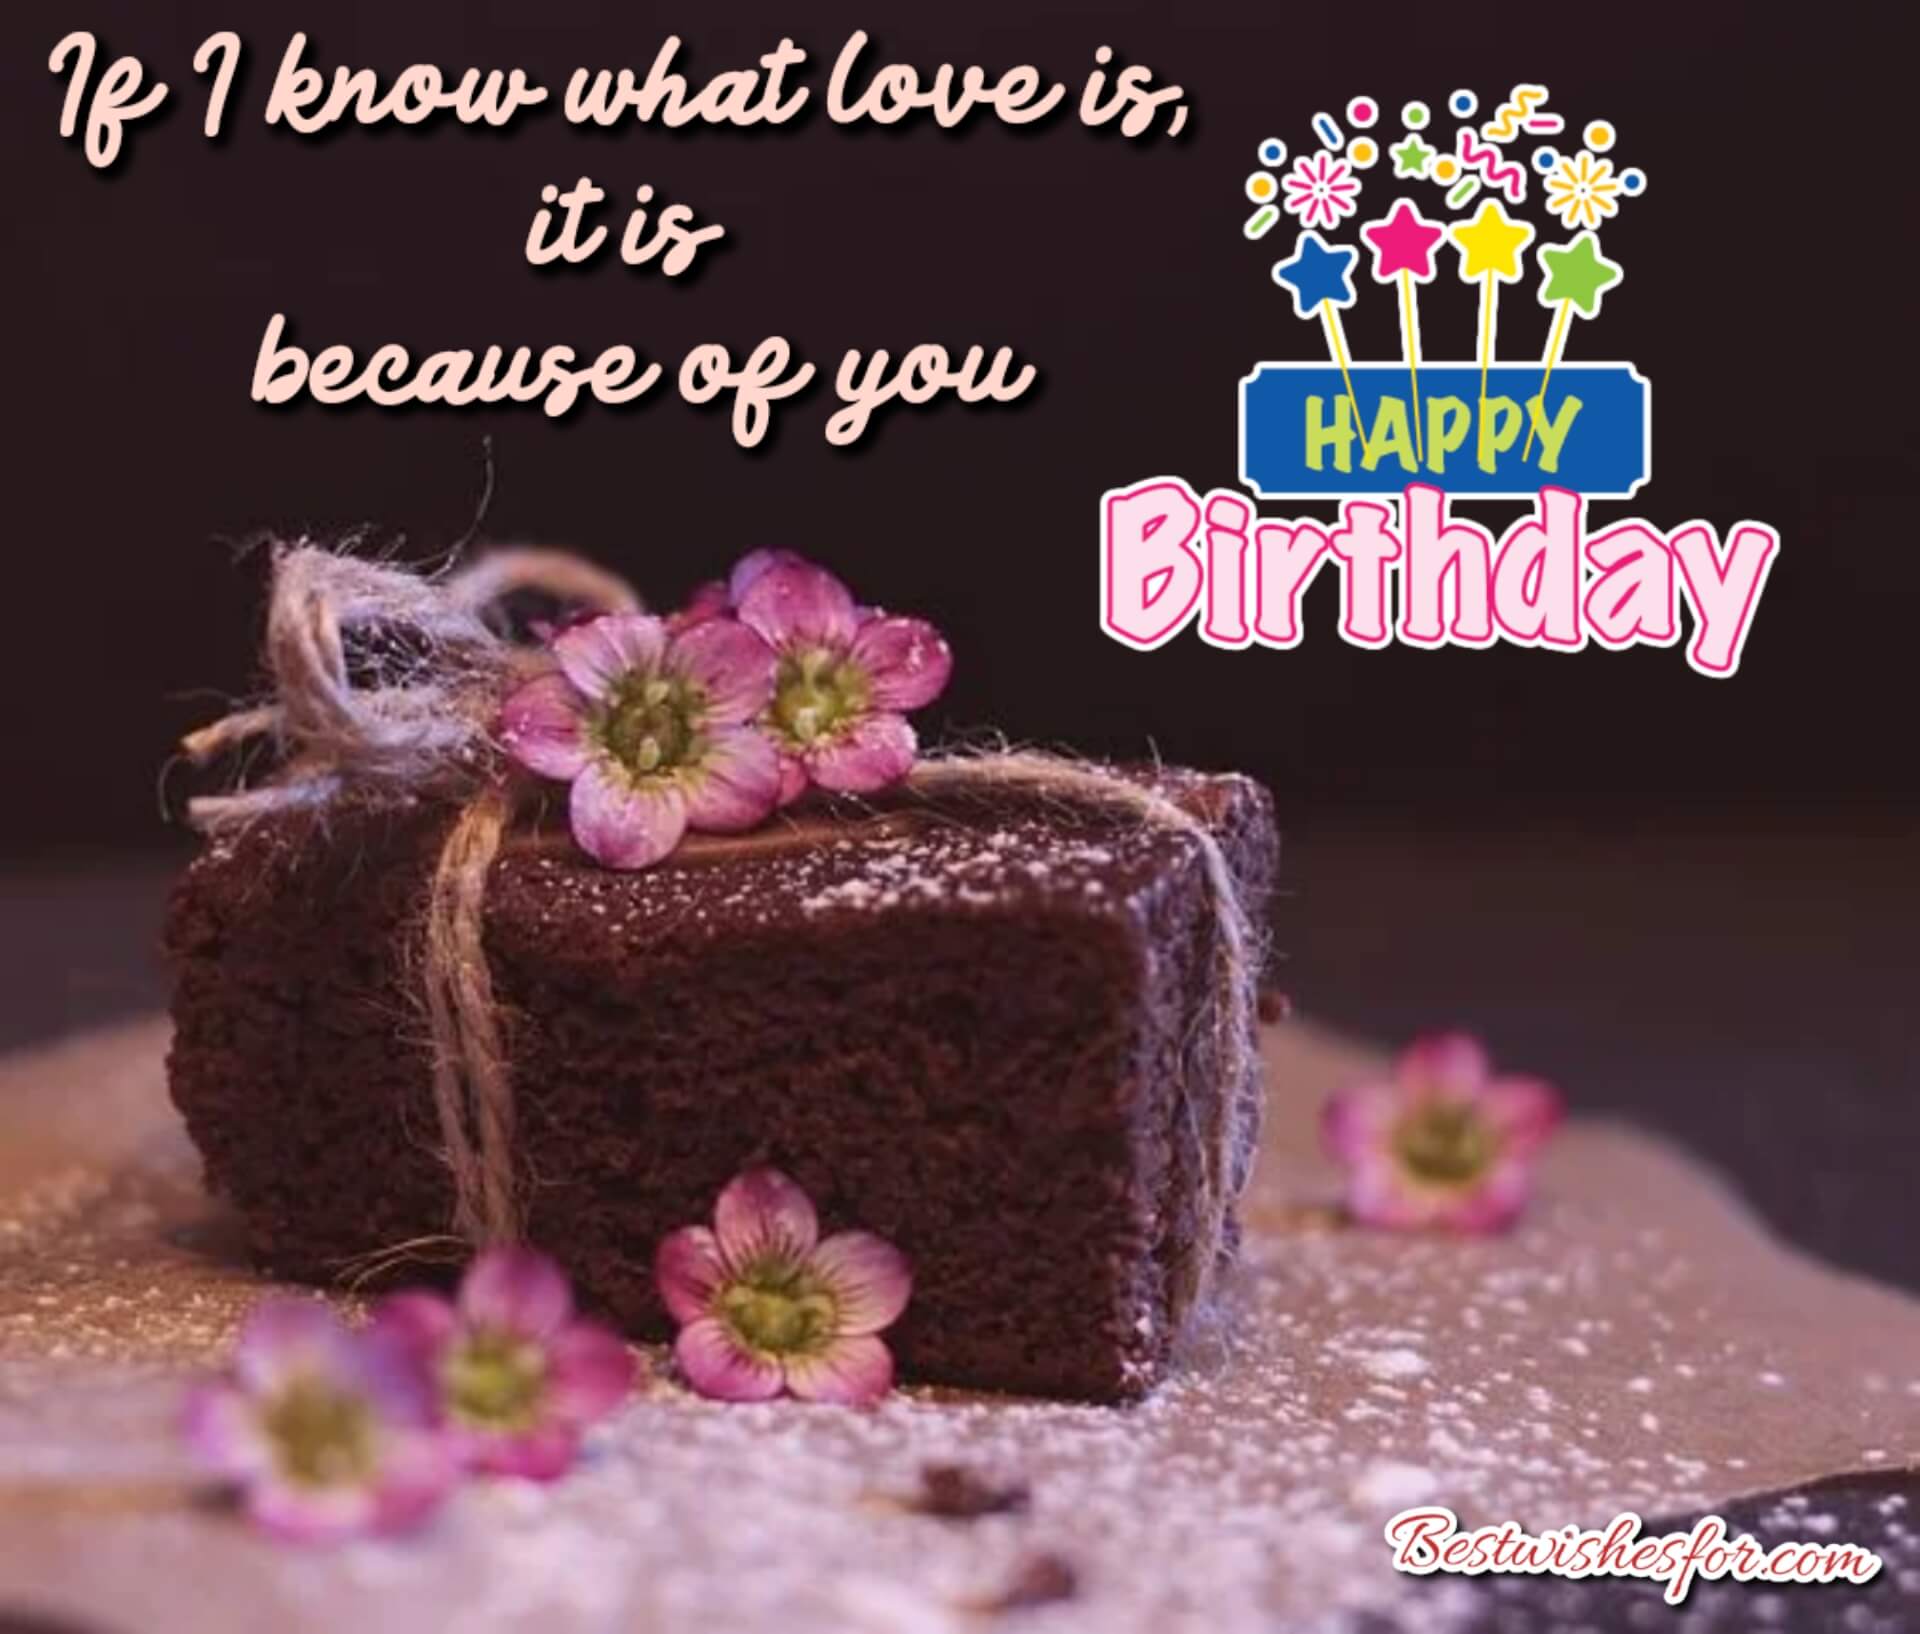 happy birthday images with cake and quotes